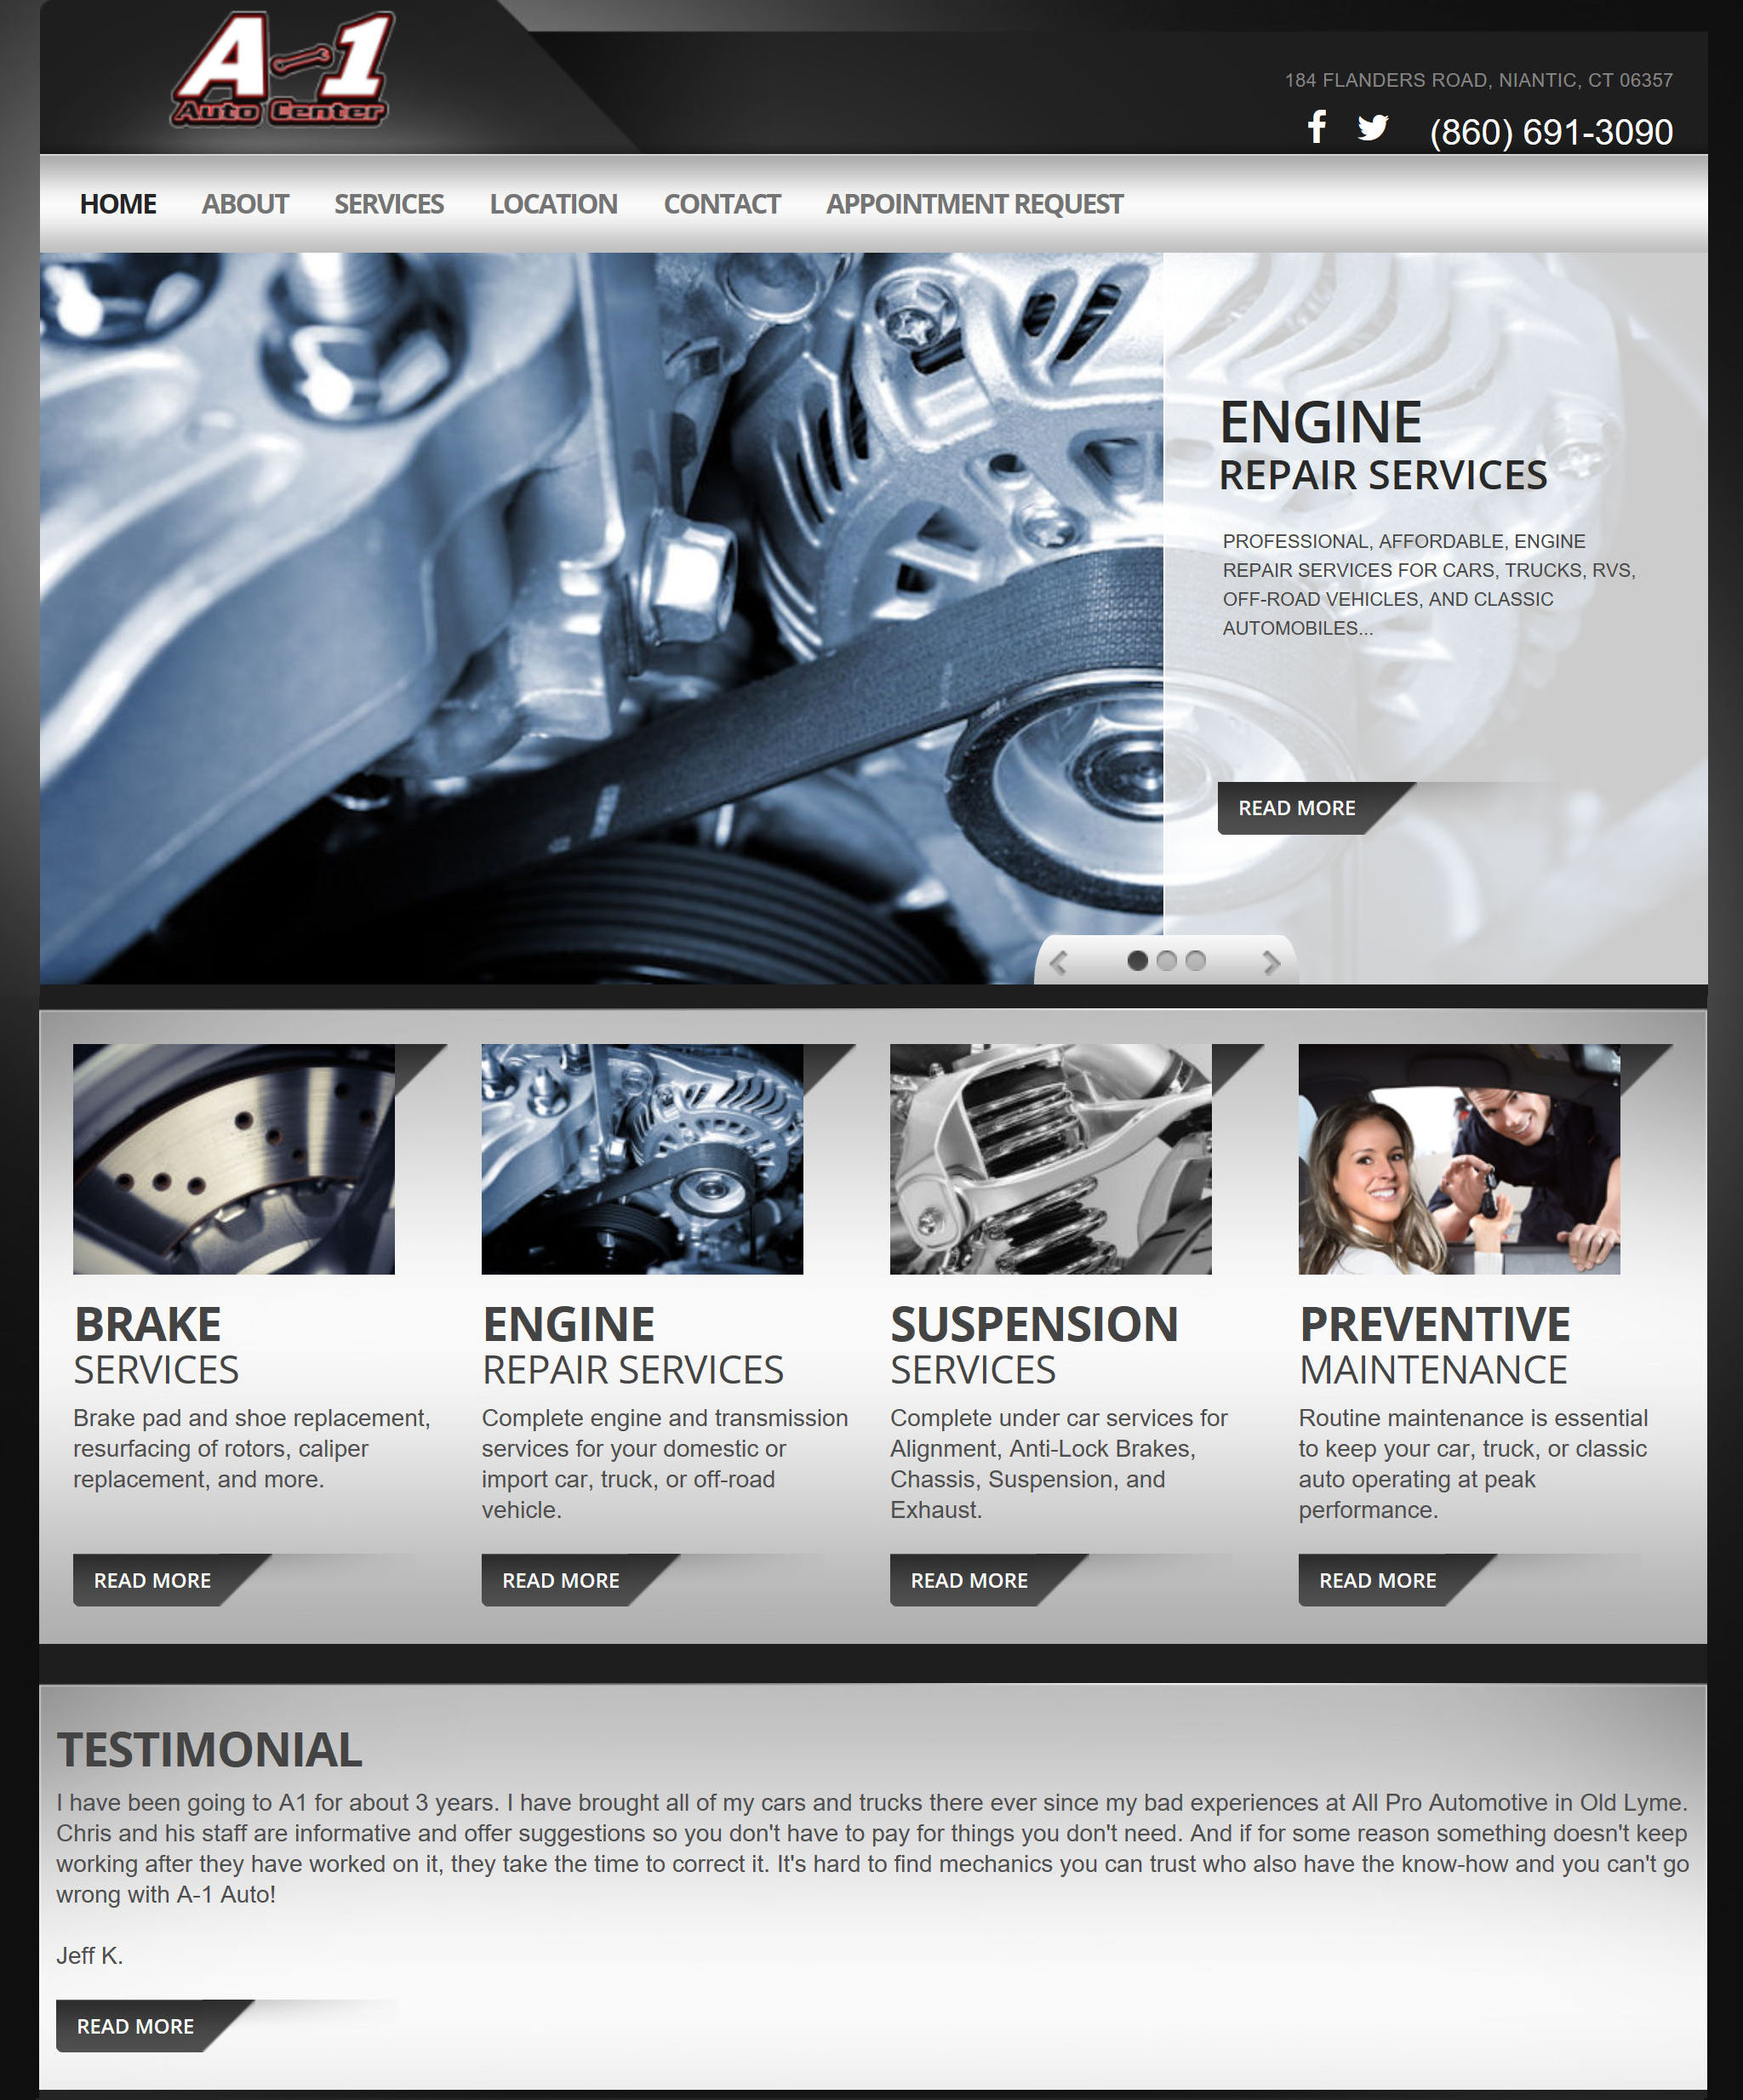 Click or touch to view a portfolio which includes samples of our website design services.